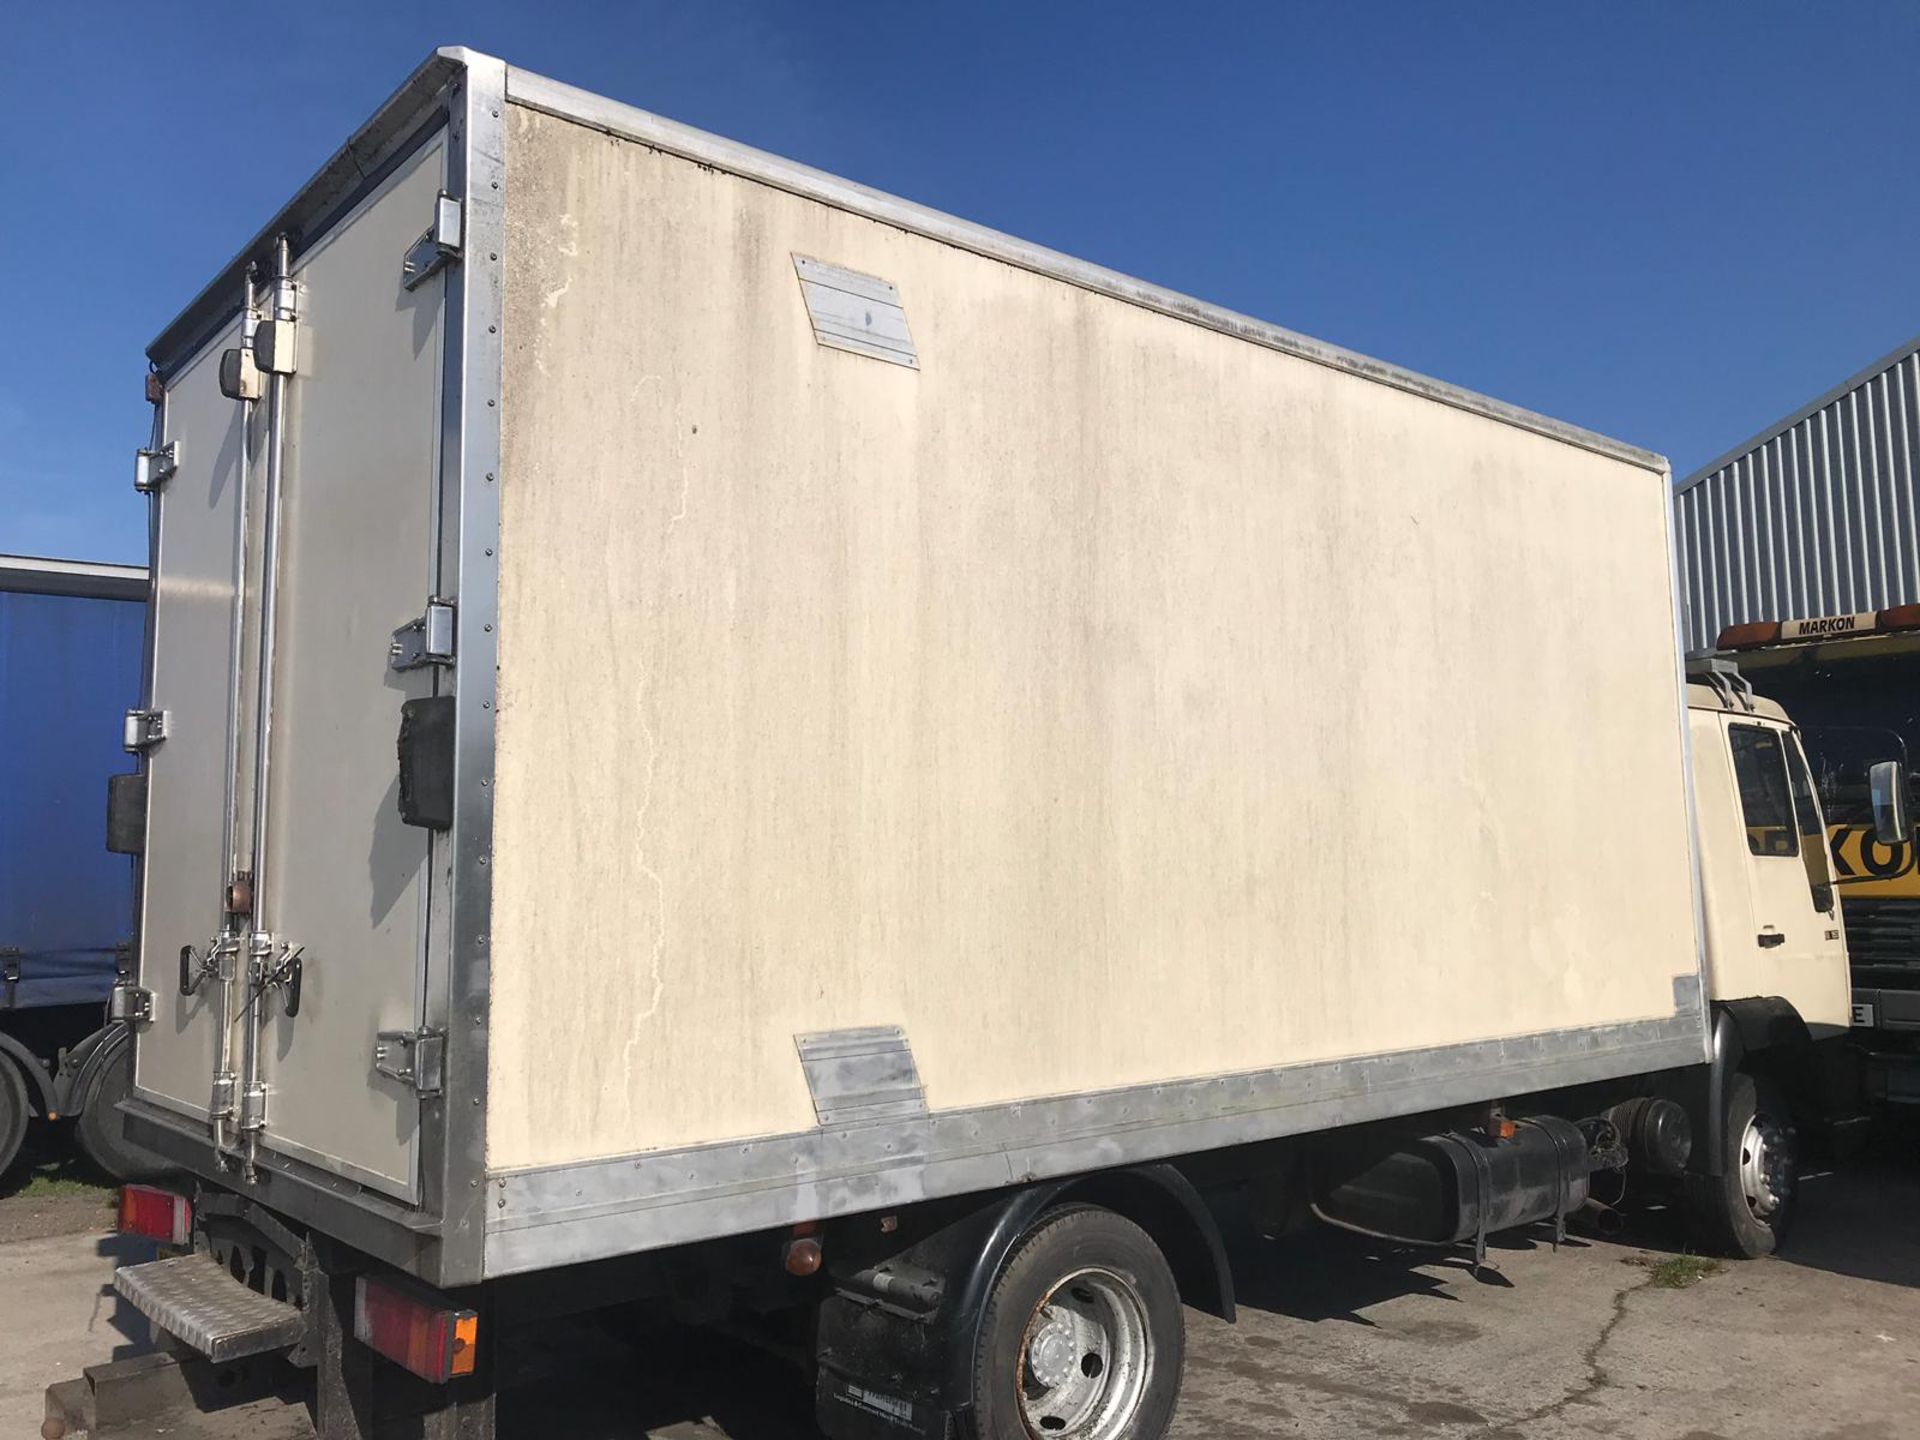 1994 MAN LE8 Refrigerated Lorry - Image 3 of 6